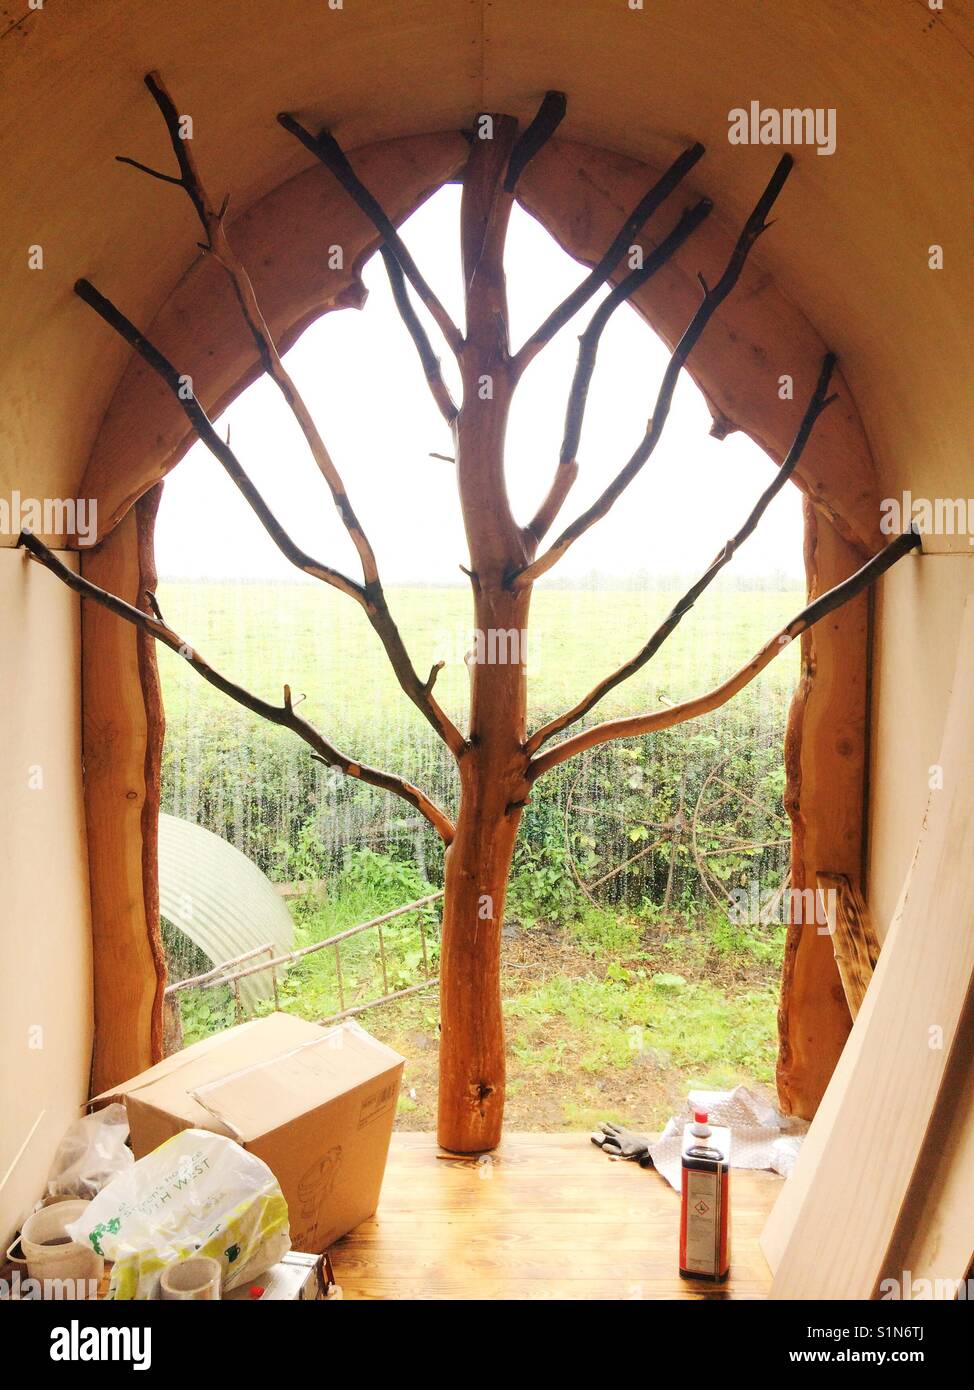 Interior picture window in a shepherds hut wagon under construction, Hampshire, England. Stock Photo